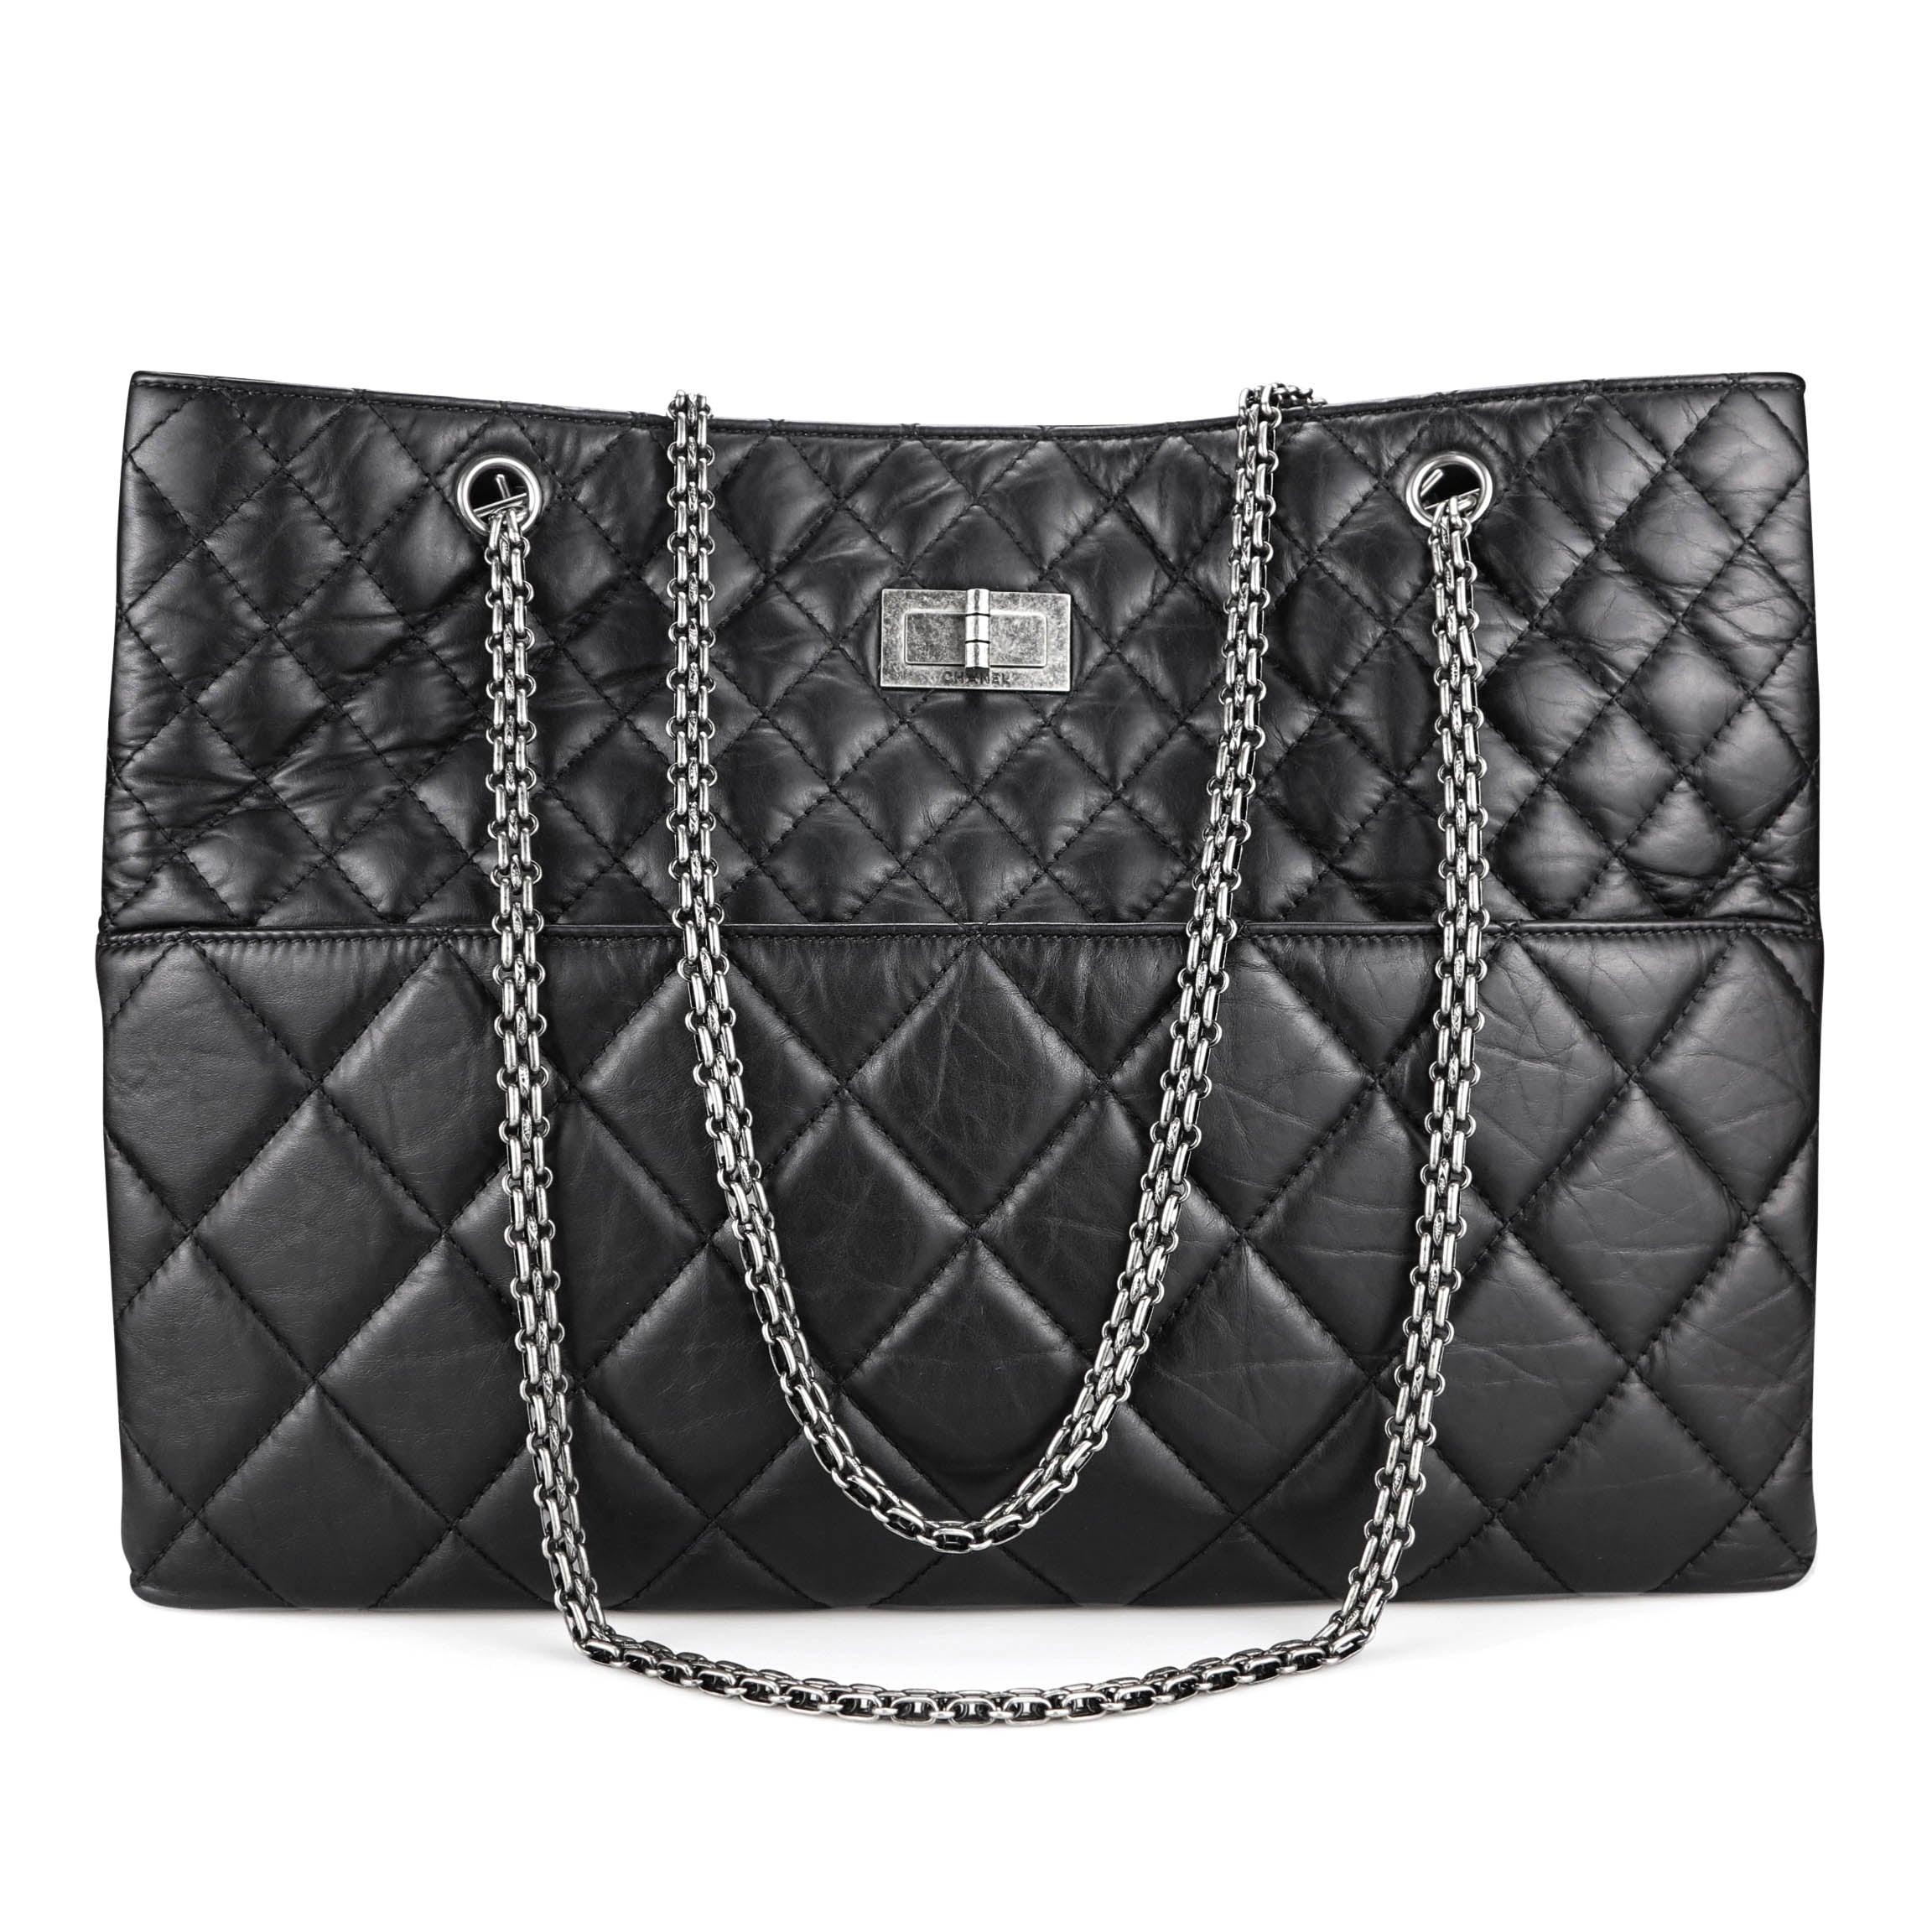 ‘Sold’ CHANEL Black Glazed Quilted Leather Beige 2.55 Reissue Grand  Shopping Tote Bag